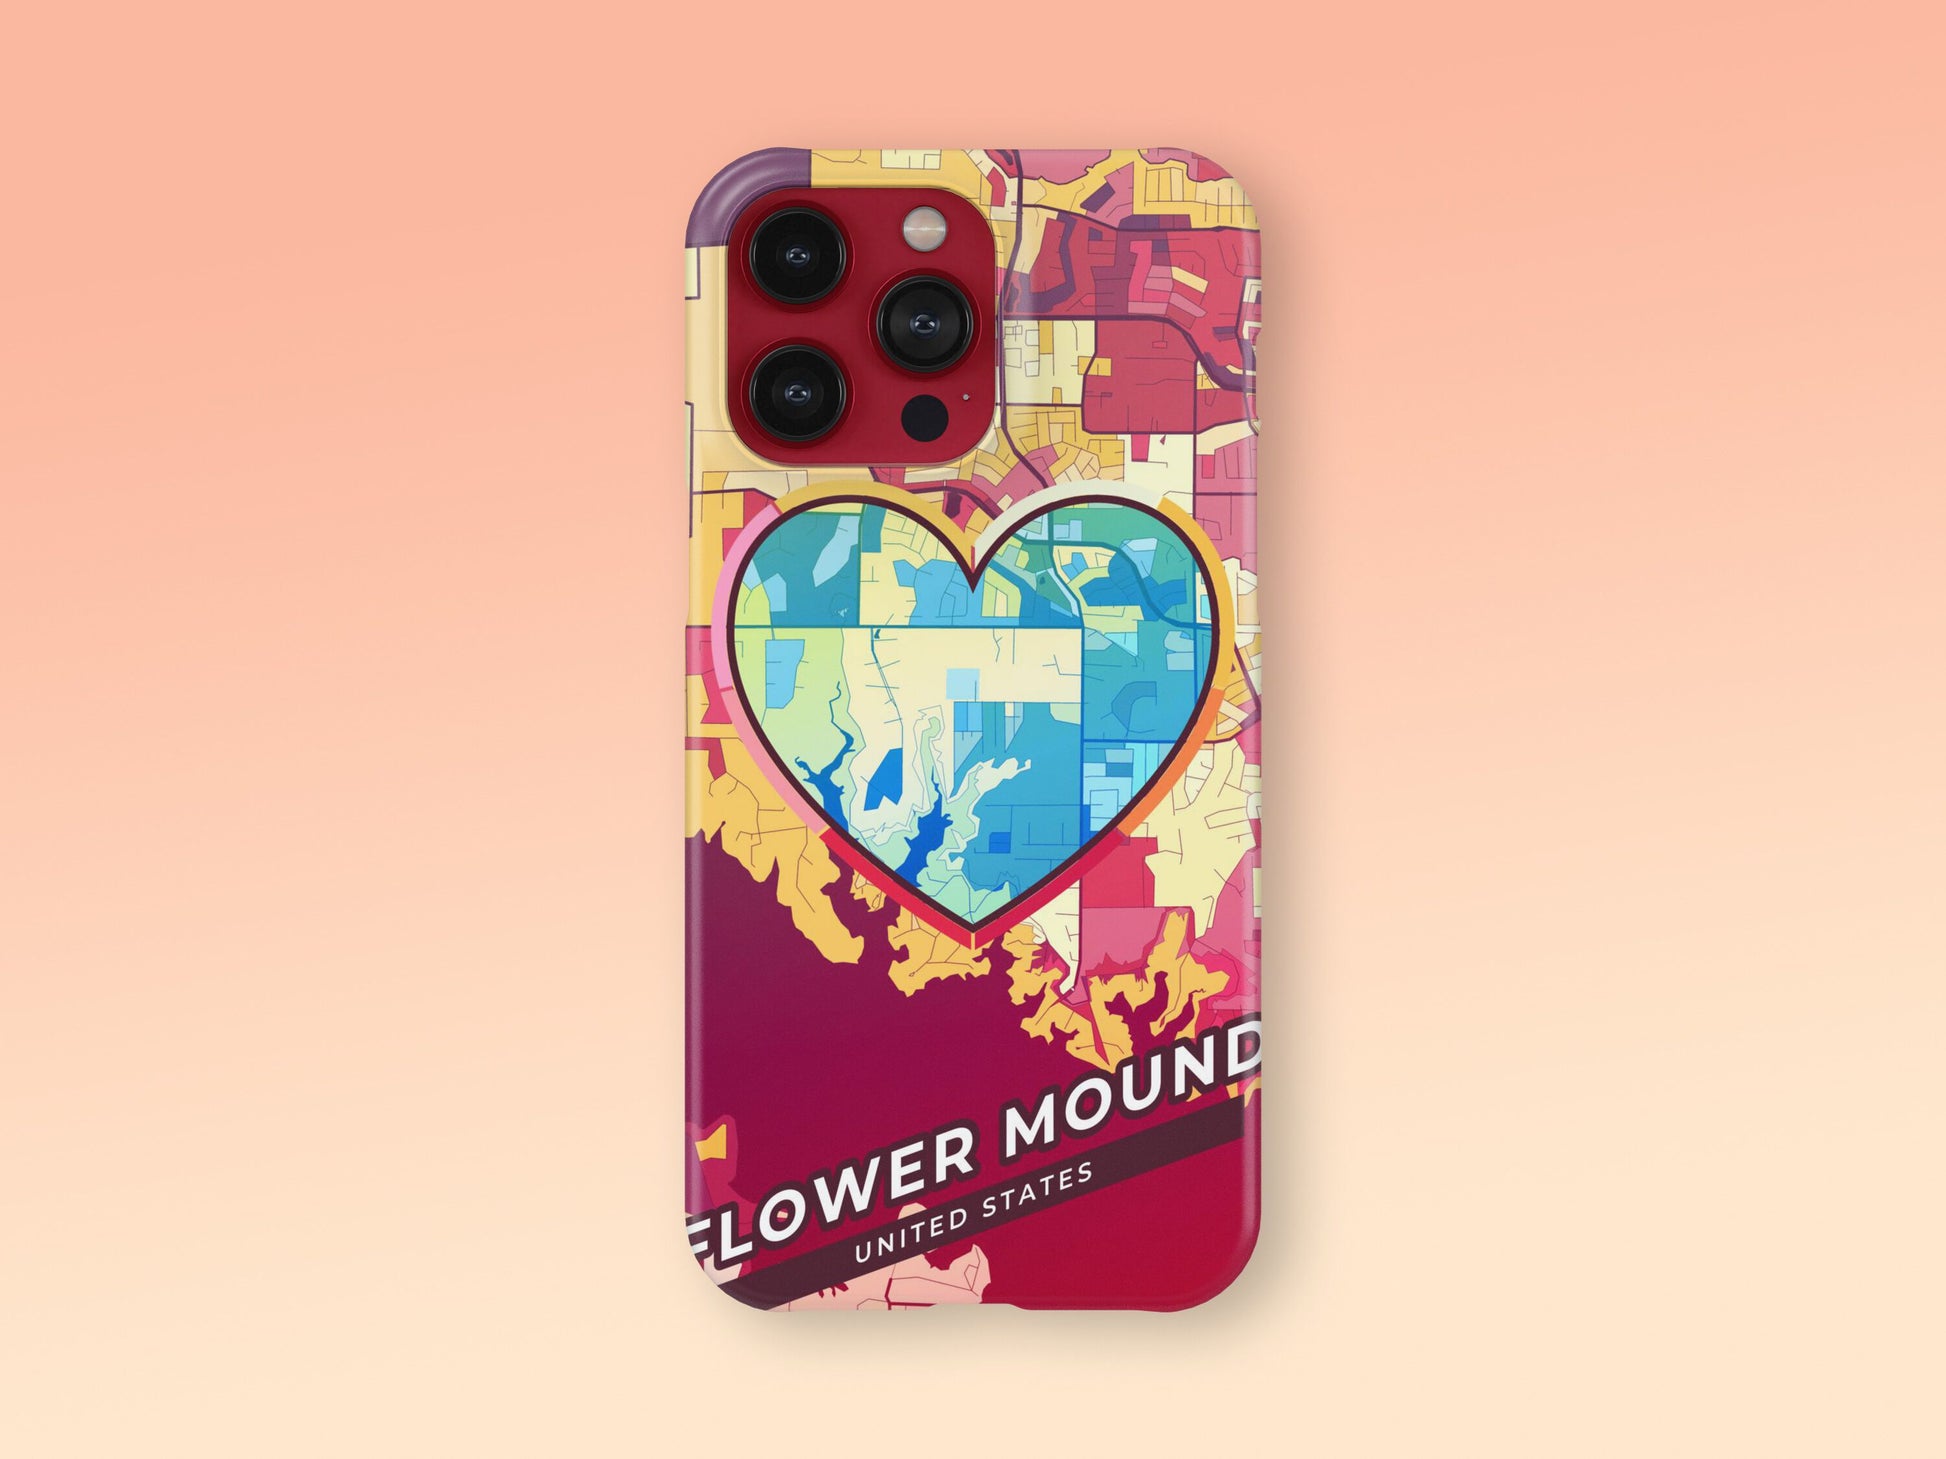 Flower Mound Texas slim phone case with colorful icon. Birthday, wedding or housewarming gift. Couple match cases. 2